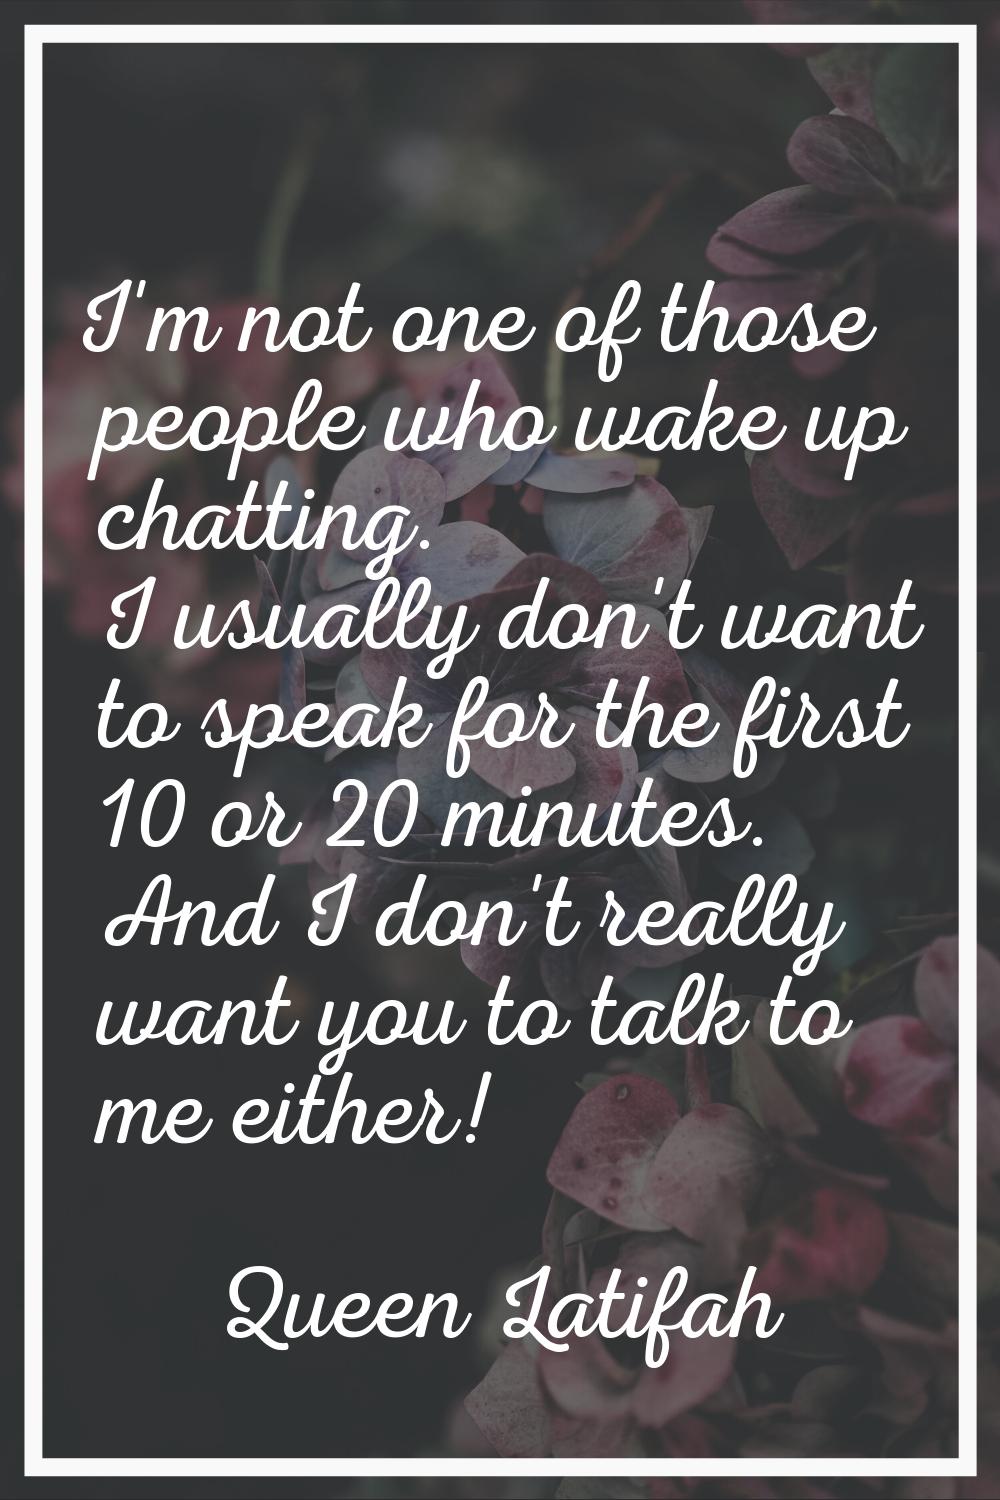 I'm not one of those people who wake up chatting. I usually don't want to speak for the first 10 or